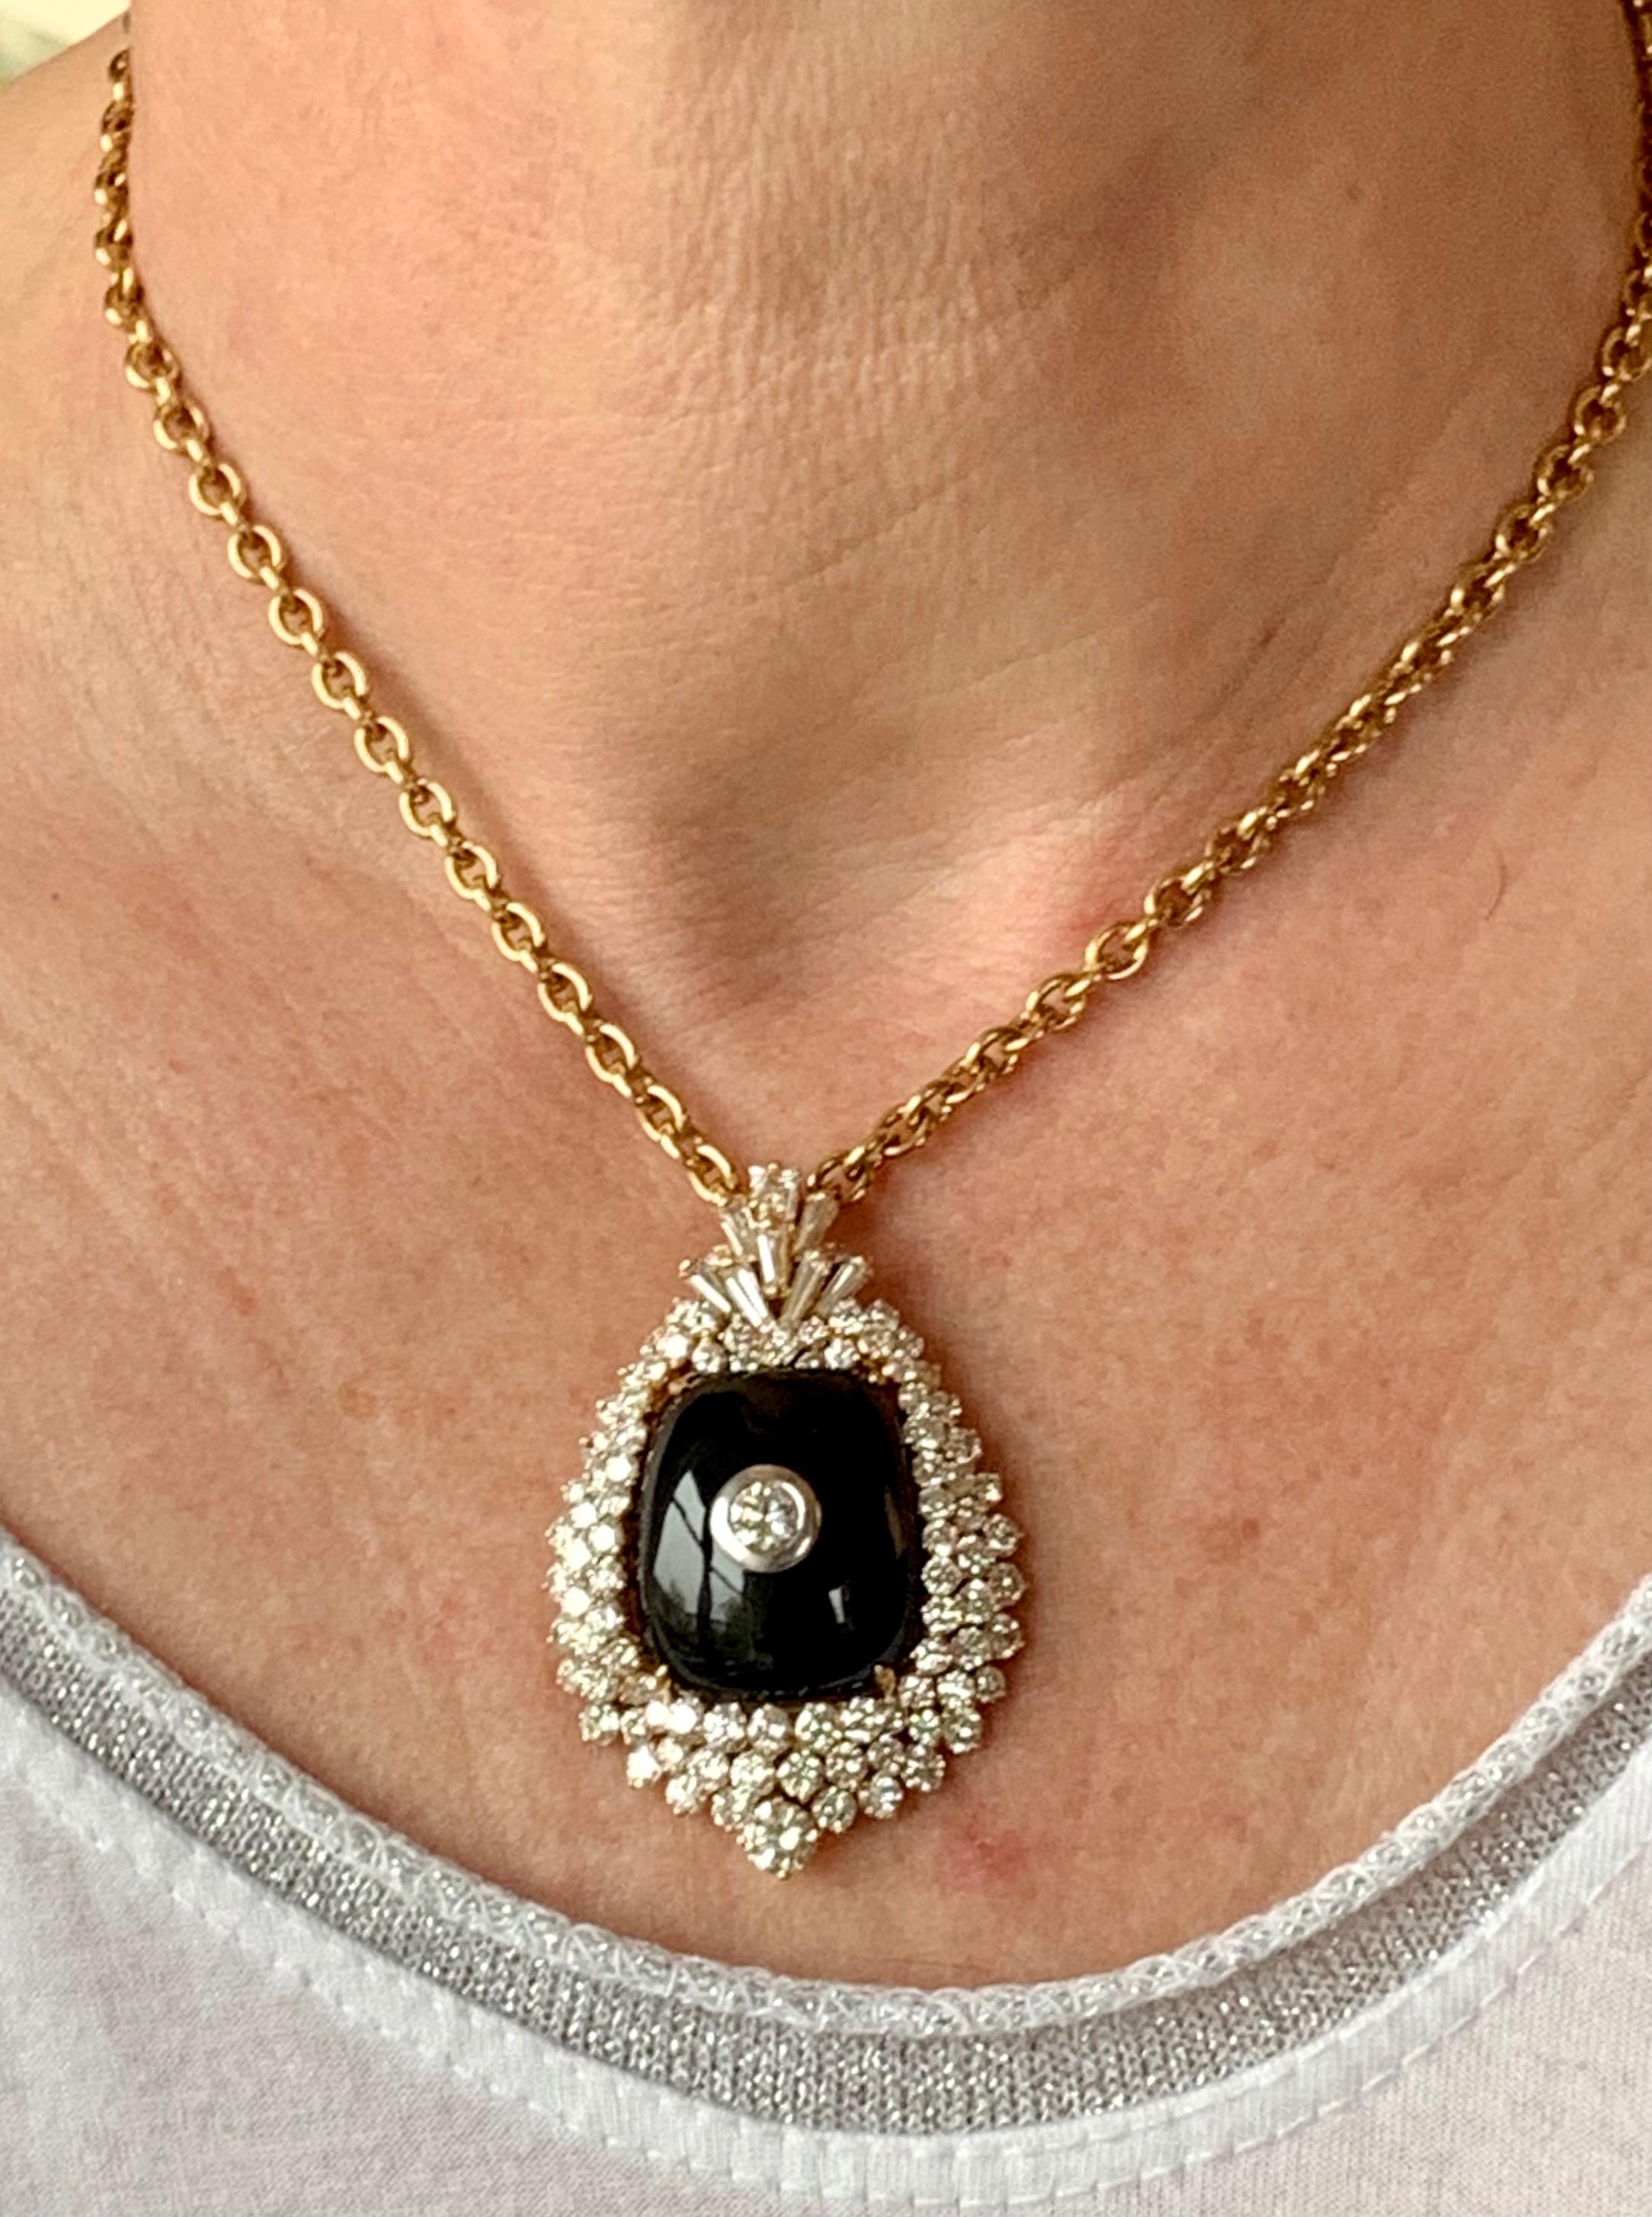 A real eye catcher this Onyx and Diamond Vintage pendant in 18 K white and yellow Gold. The pendant is set with 2 larger brilliant cut Diamonds weighing approximately 0.90 ct, H color, vs clarity, 5 baguette Diamonds weighing ca. 1 ct, and 83